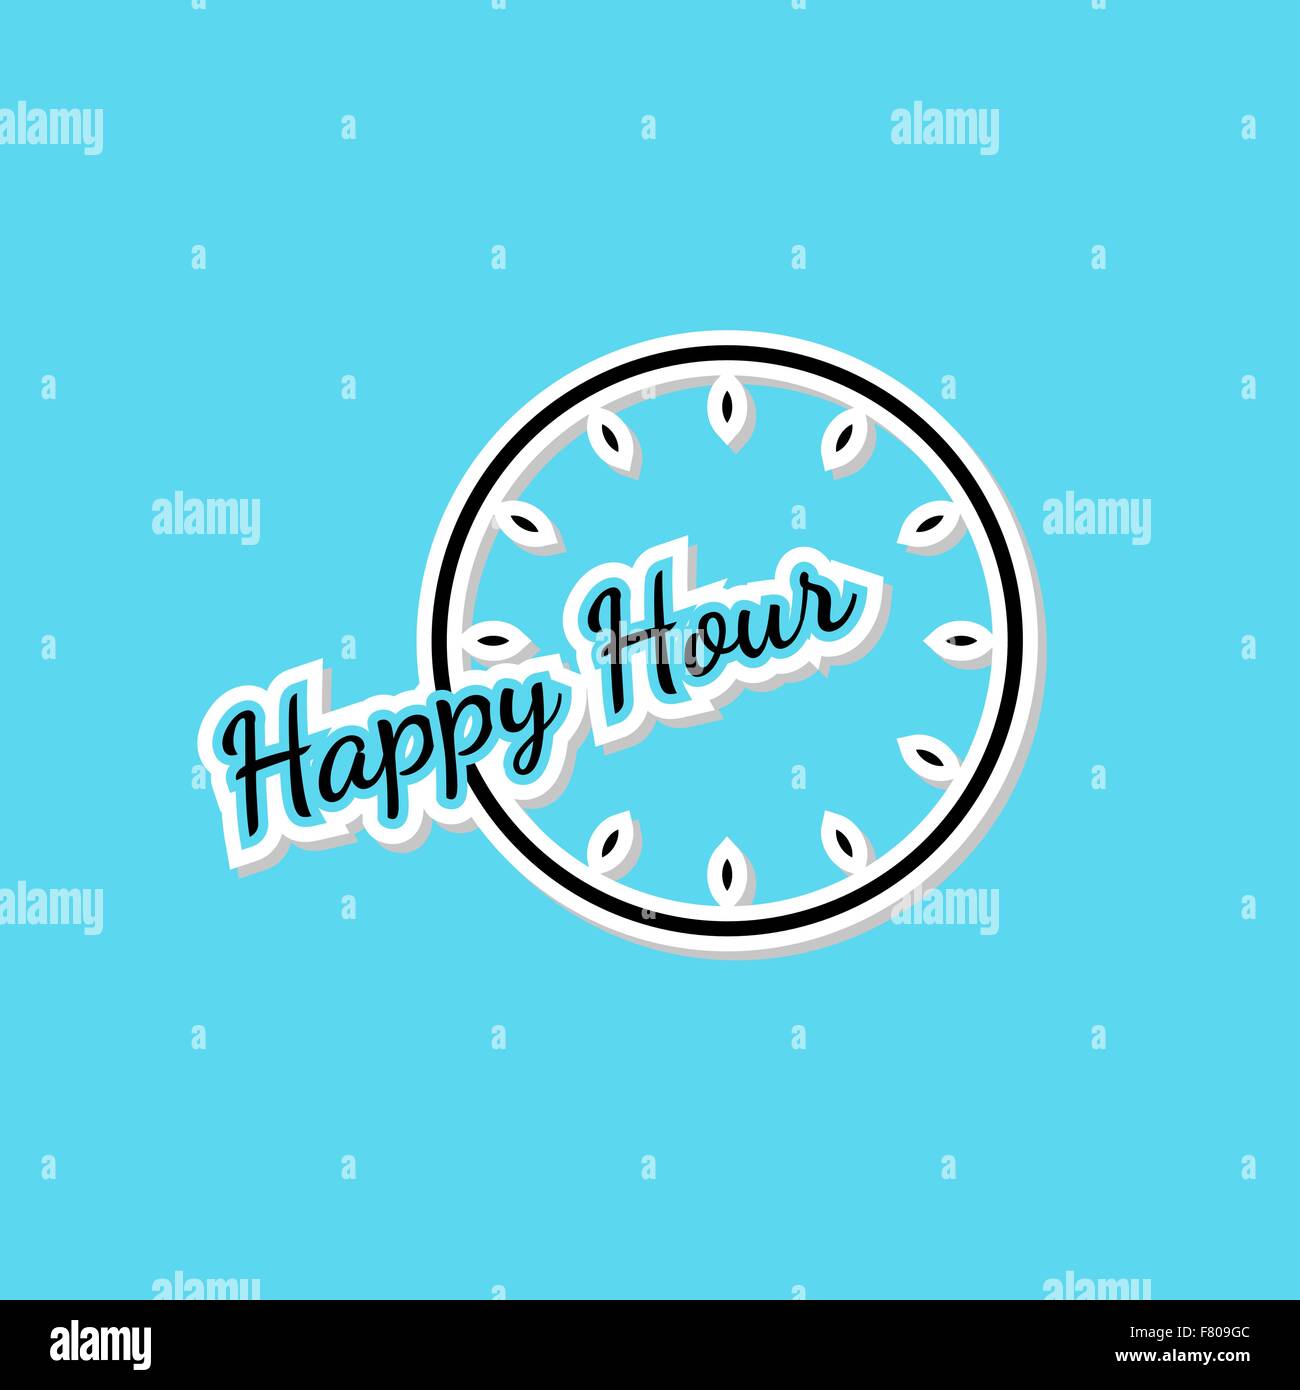 blue happy hour background with clock Stock Vector